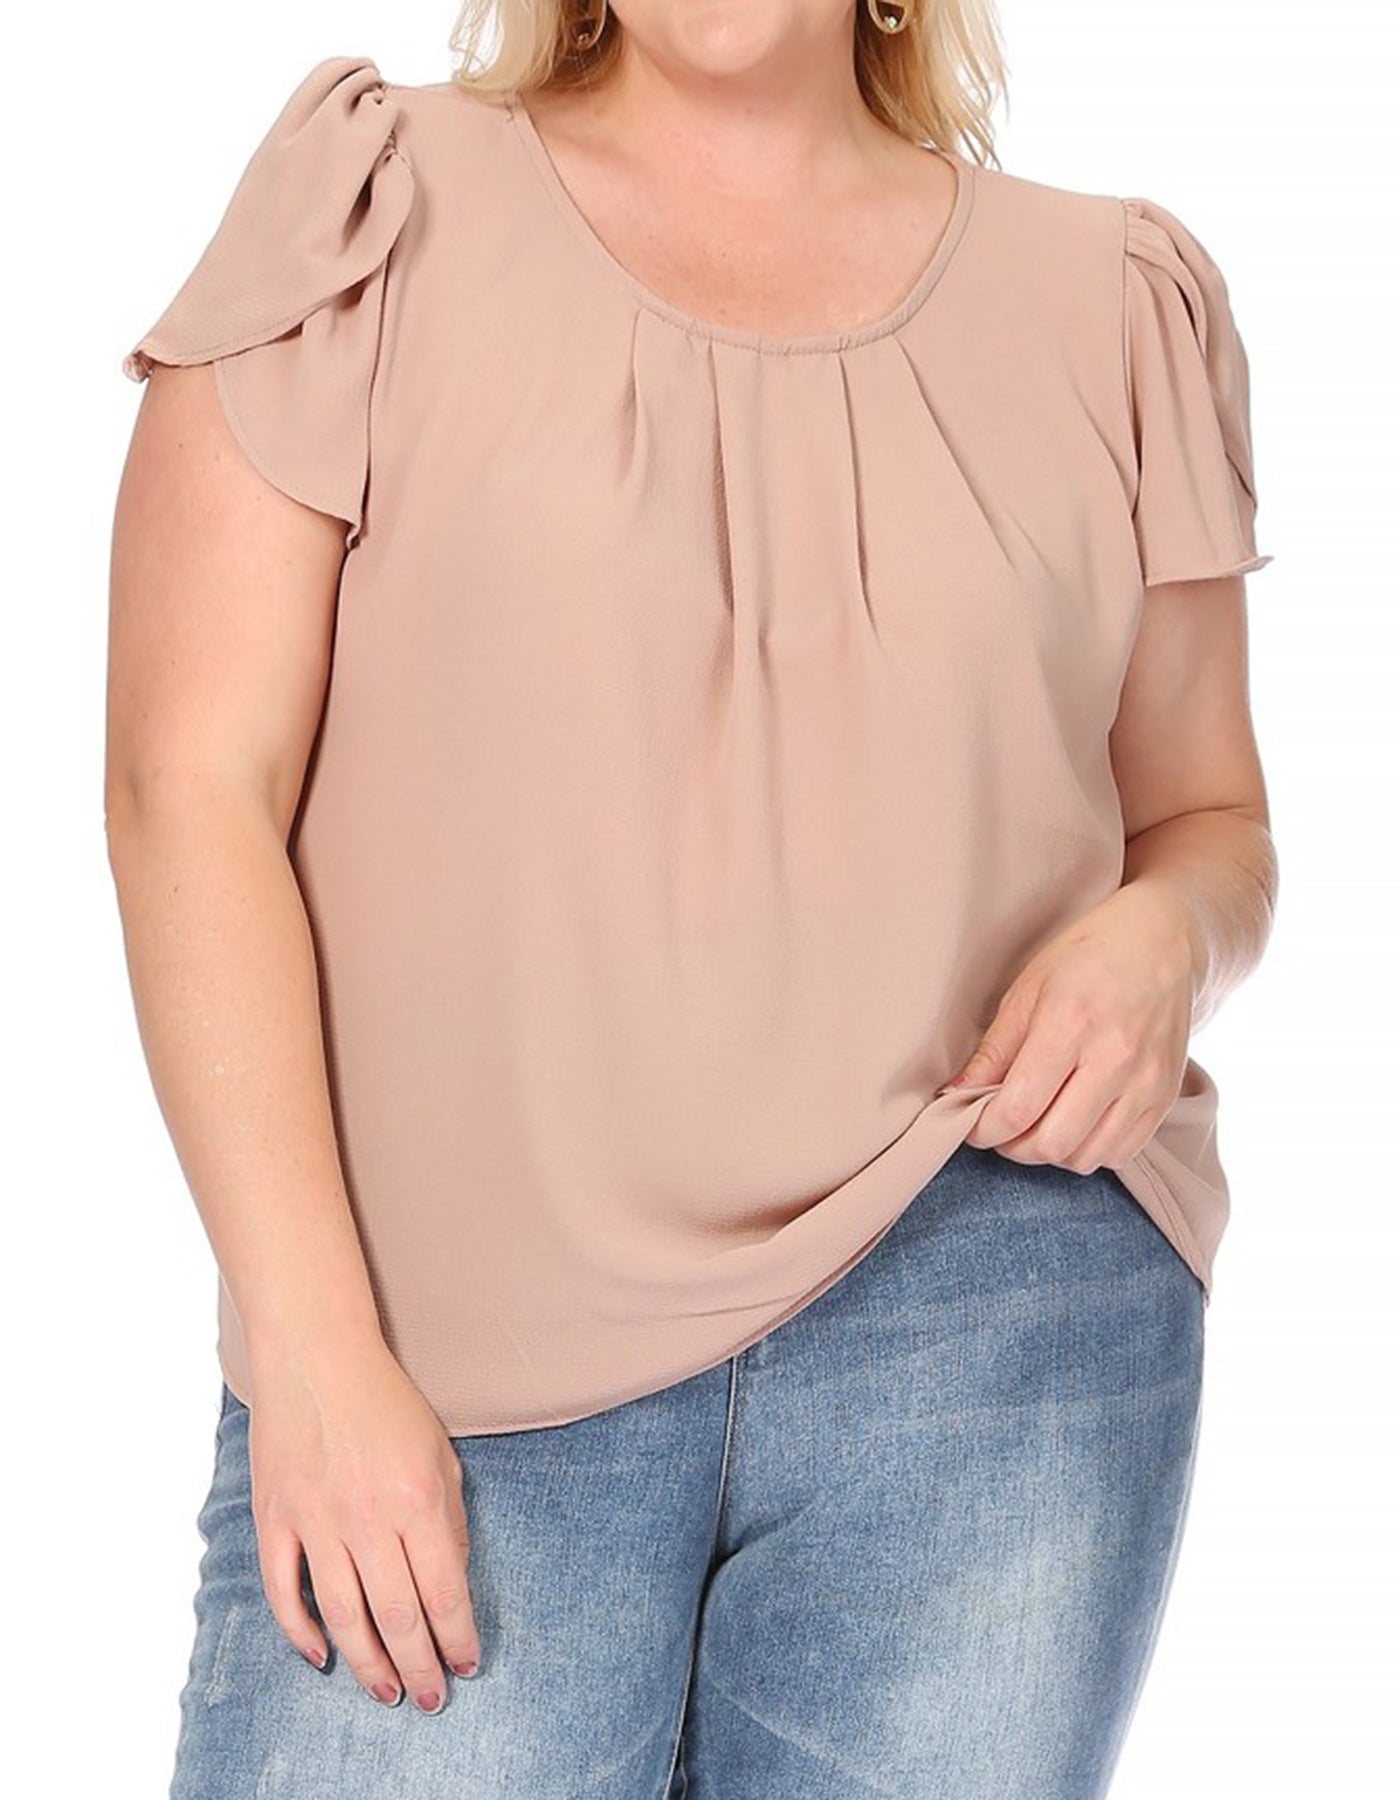 Women's Plus Size Casual Solid Pleated Front Petal Cap Sleeve Round Neck Tee Blouse Top